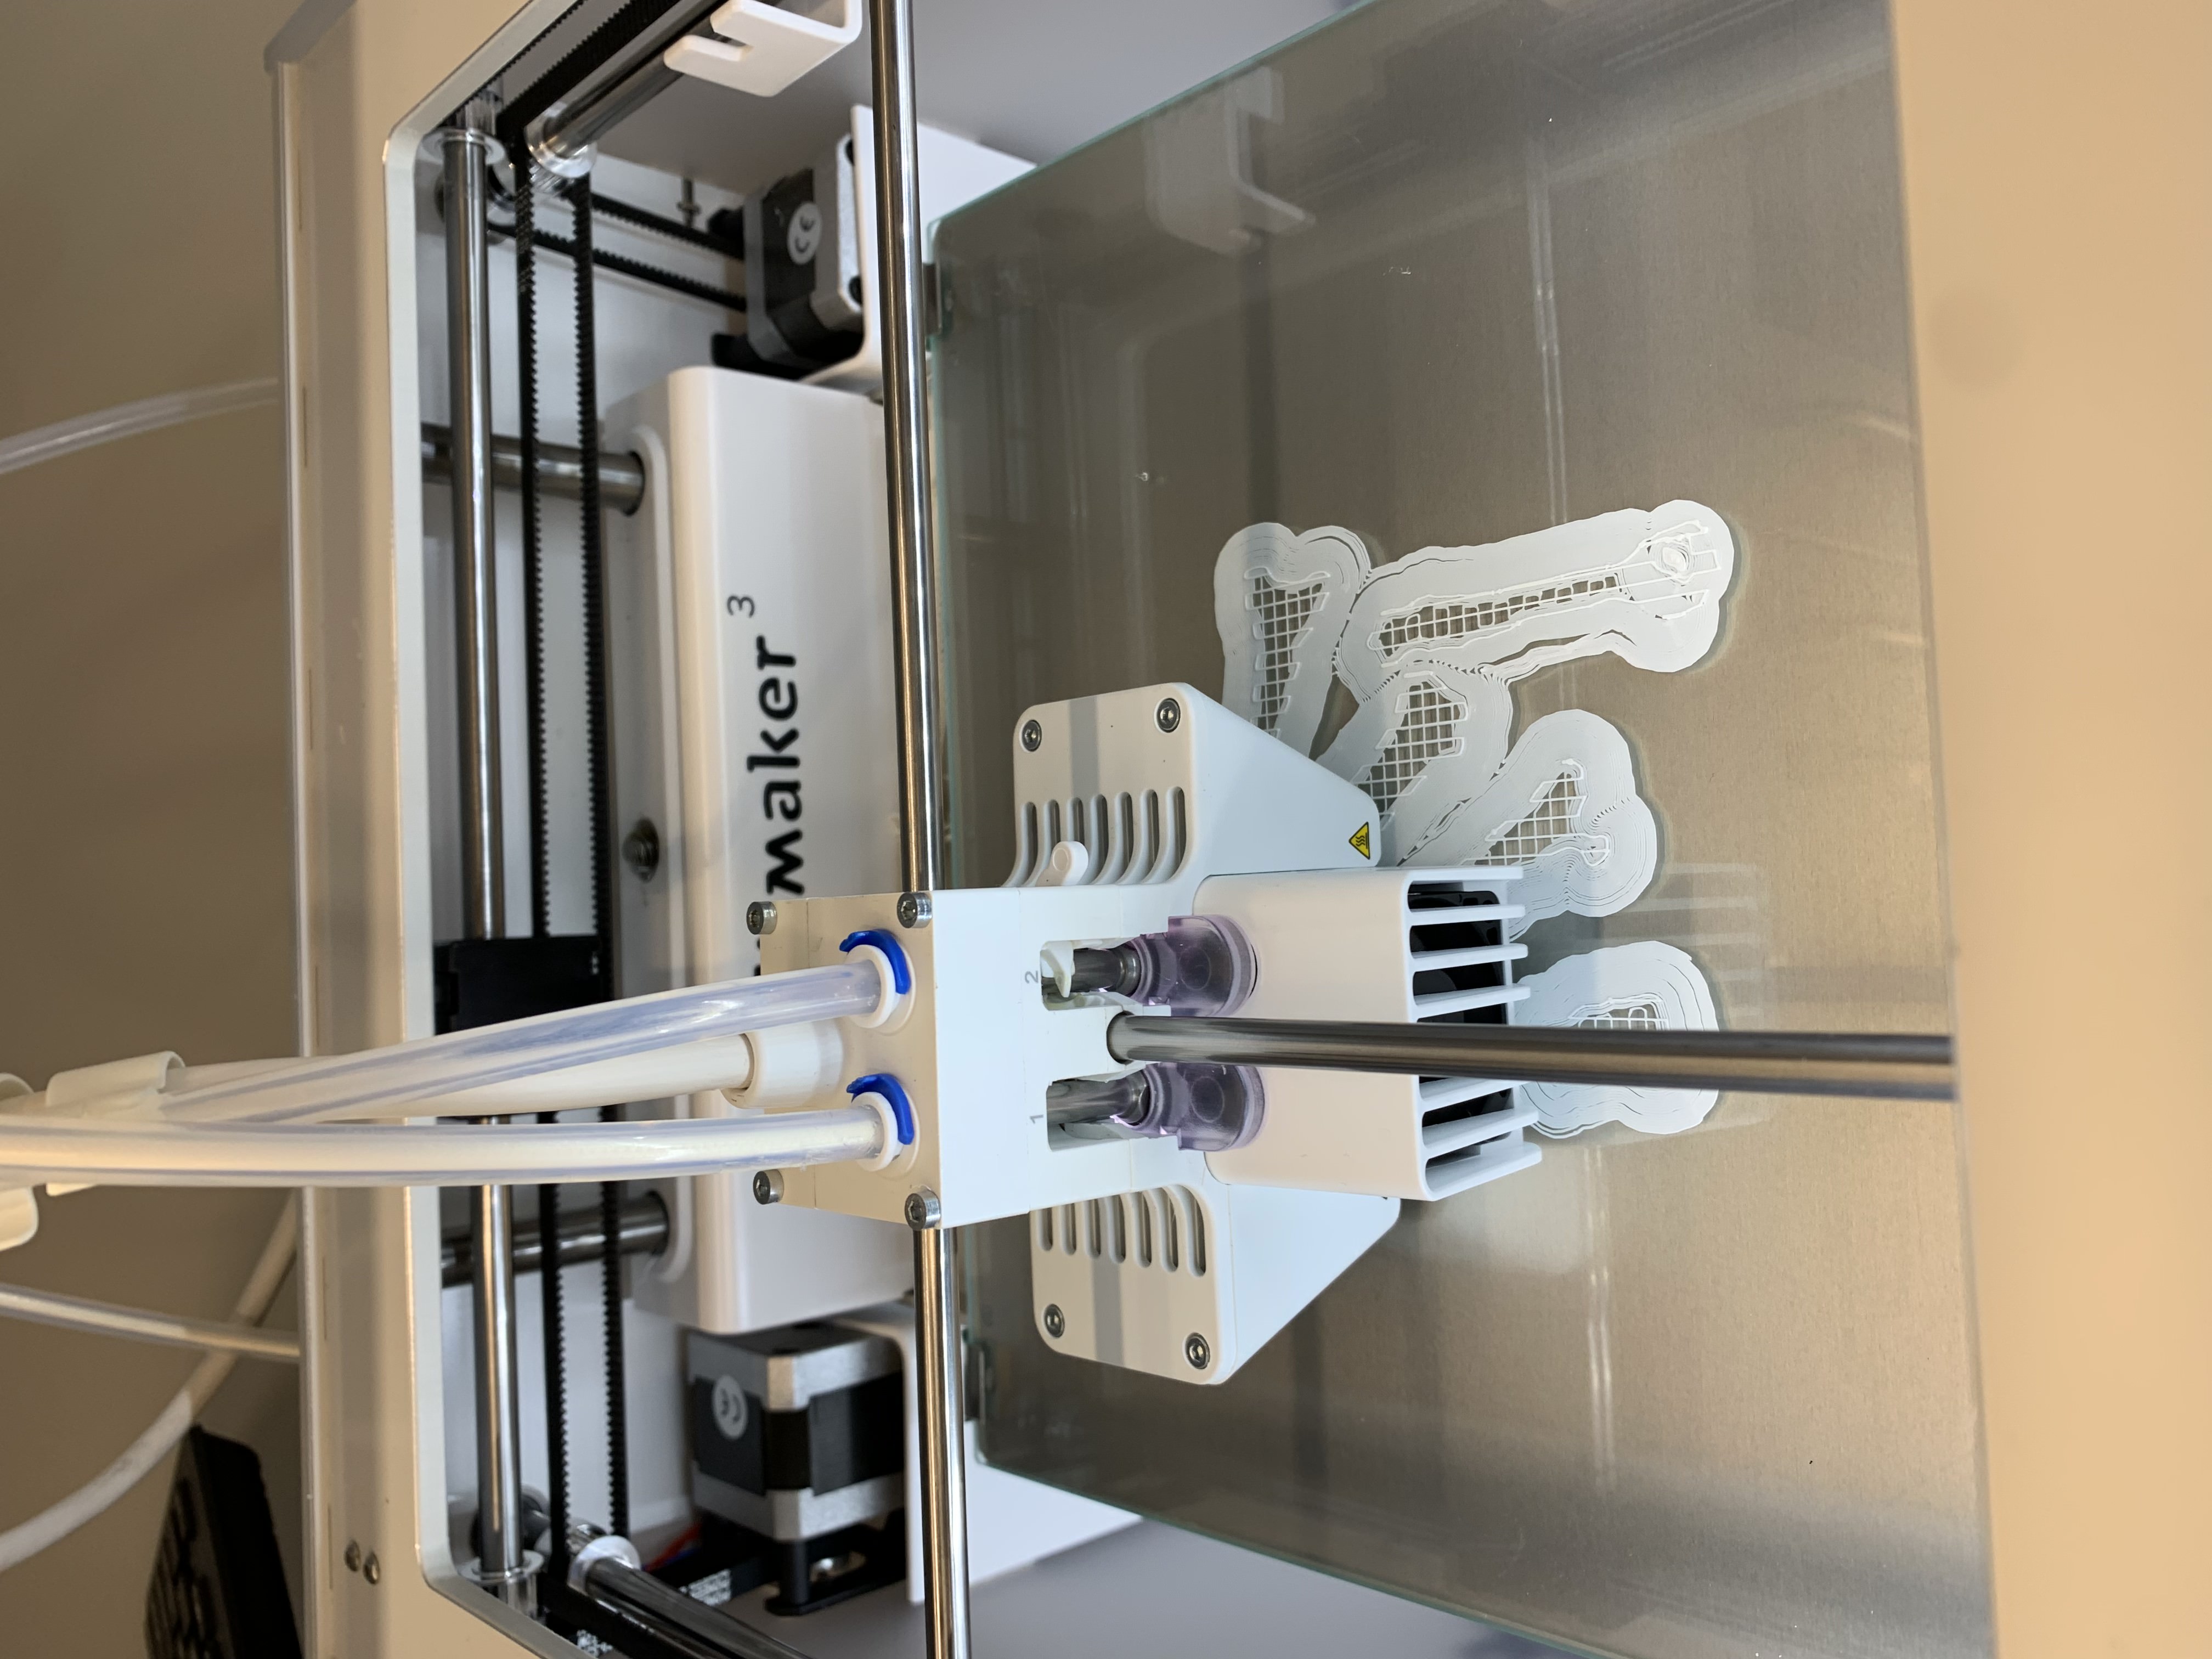 A 3D printer printing one of the bones needed for Melissa Gross' Art of Anatomy mini-course.